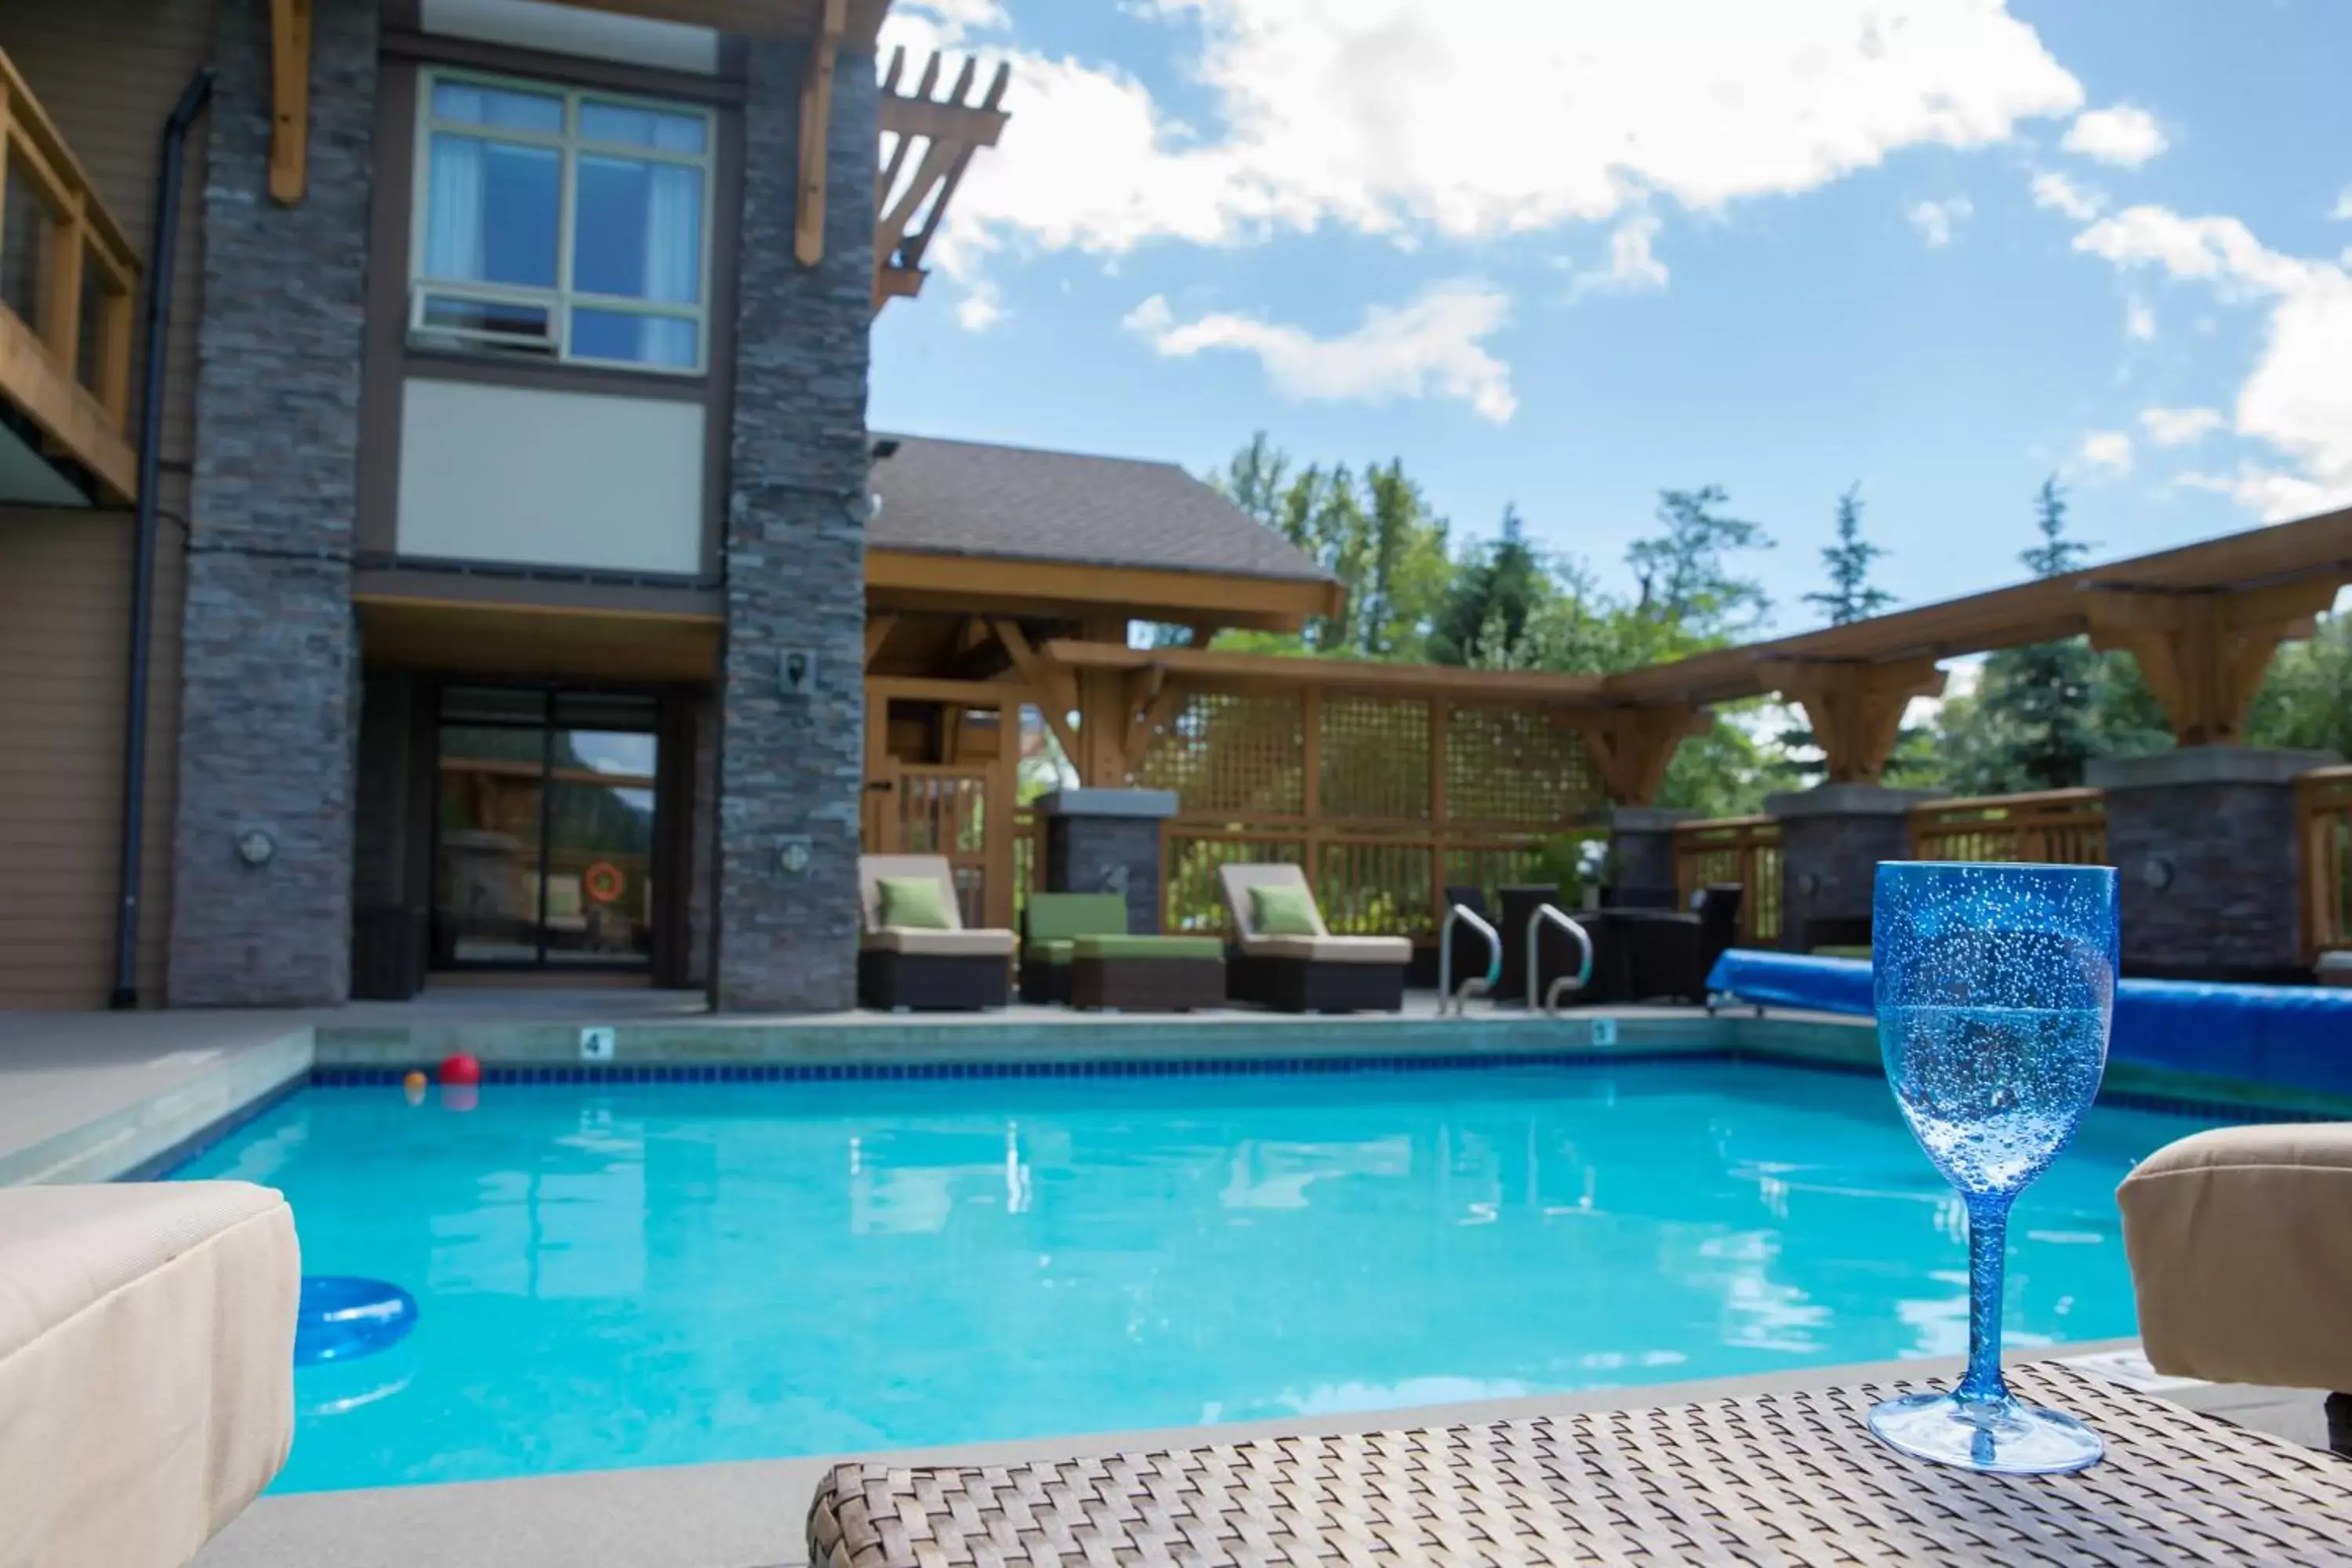 Staff, Swimming Pool in Executive Suites Hotel and Resort, Squamish